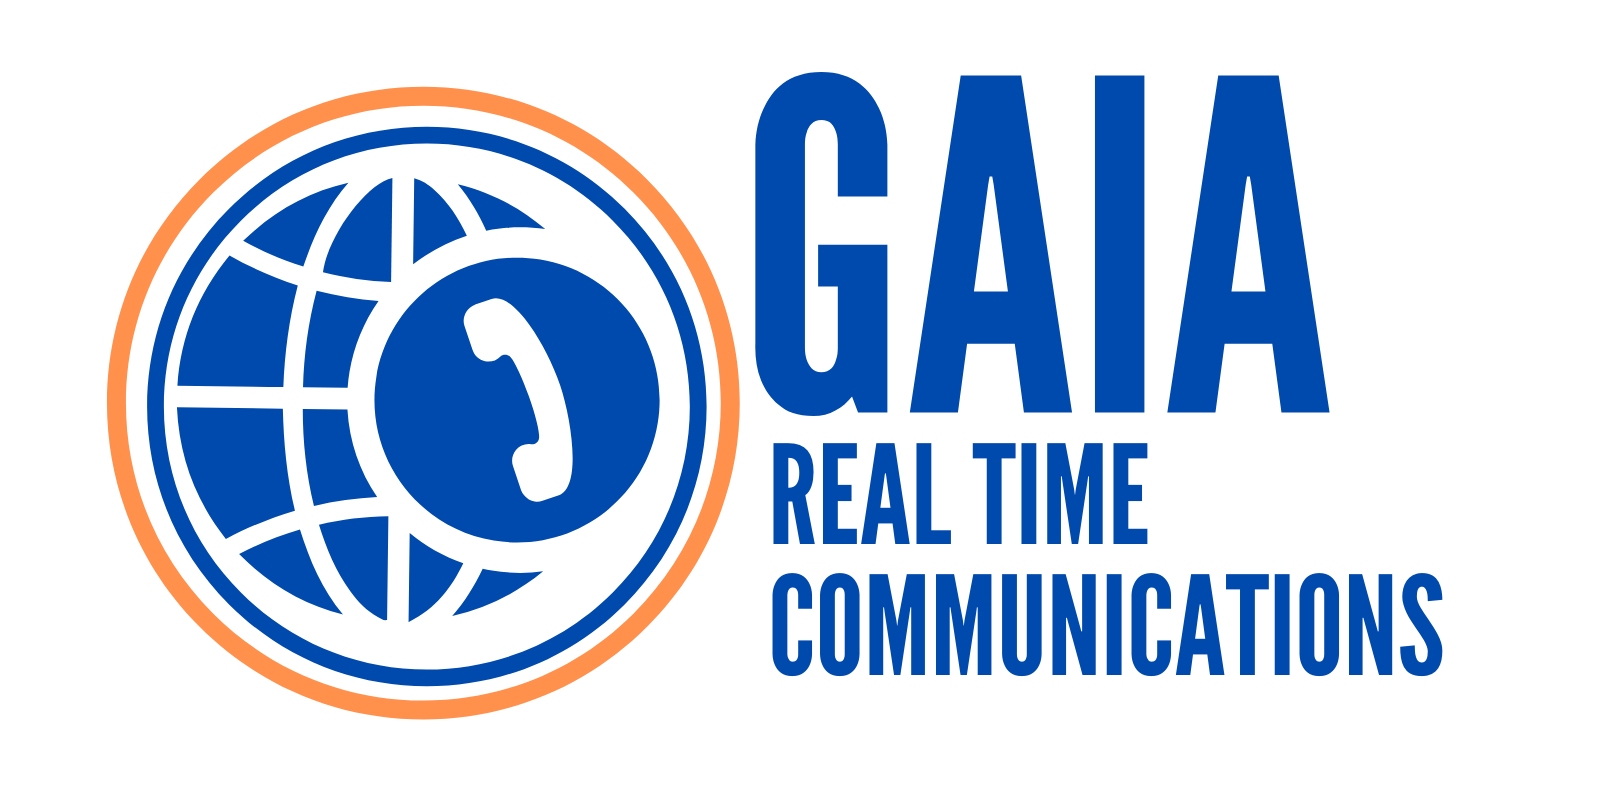 GAIA Real Time Communications Logo